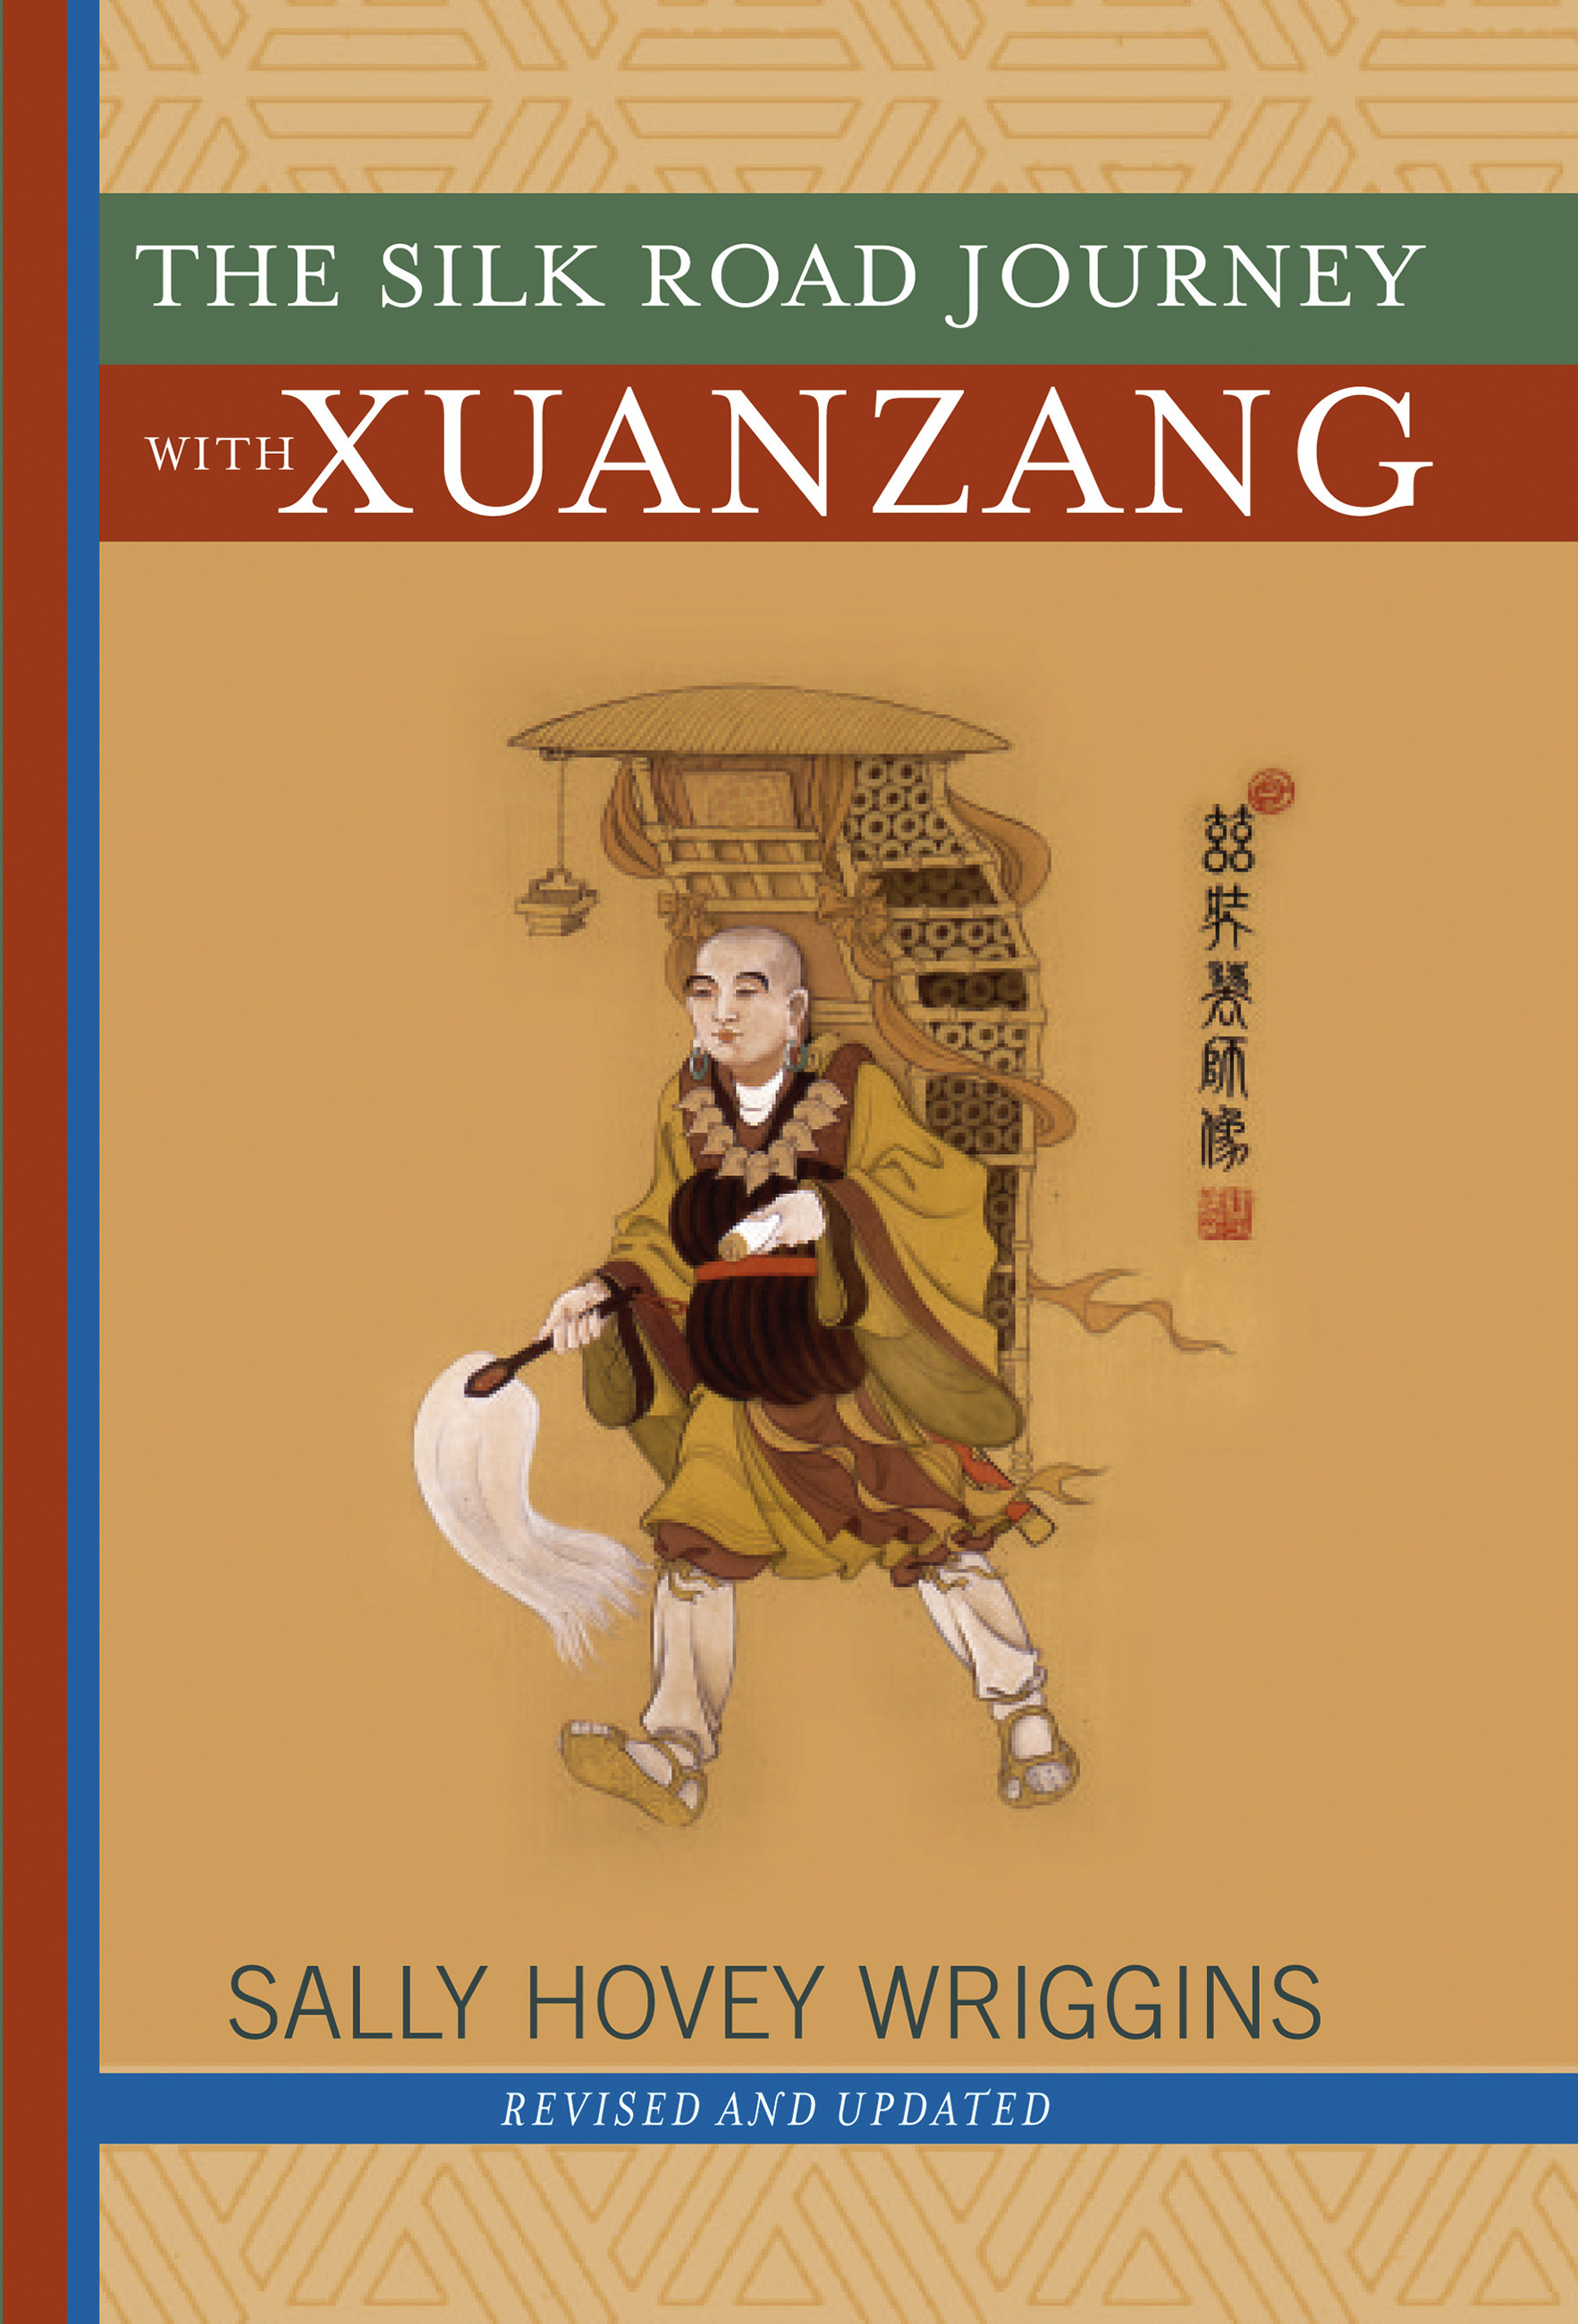 The Silk Road Journey With Xuanzang by Sally Wriggins | Hachette Book Group